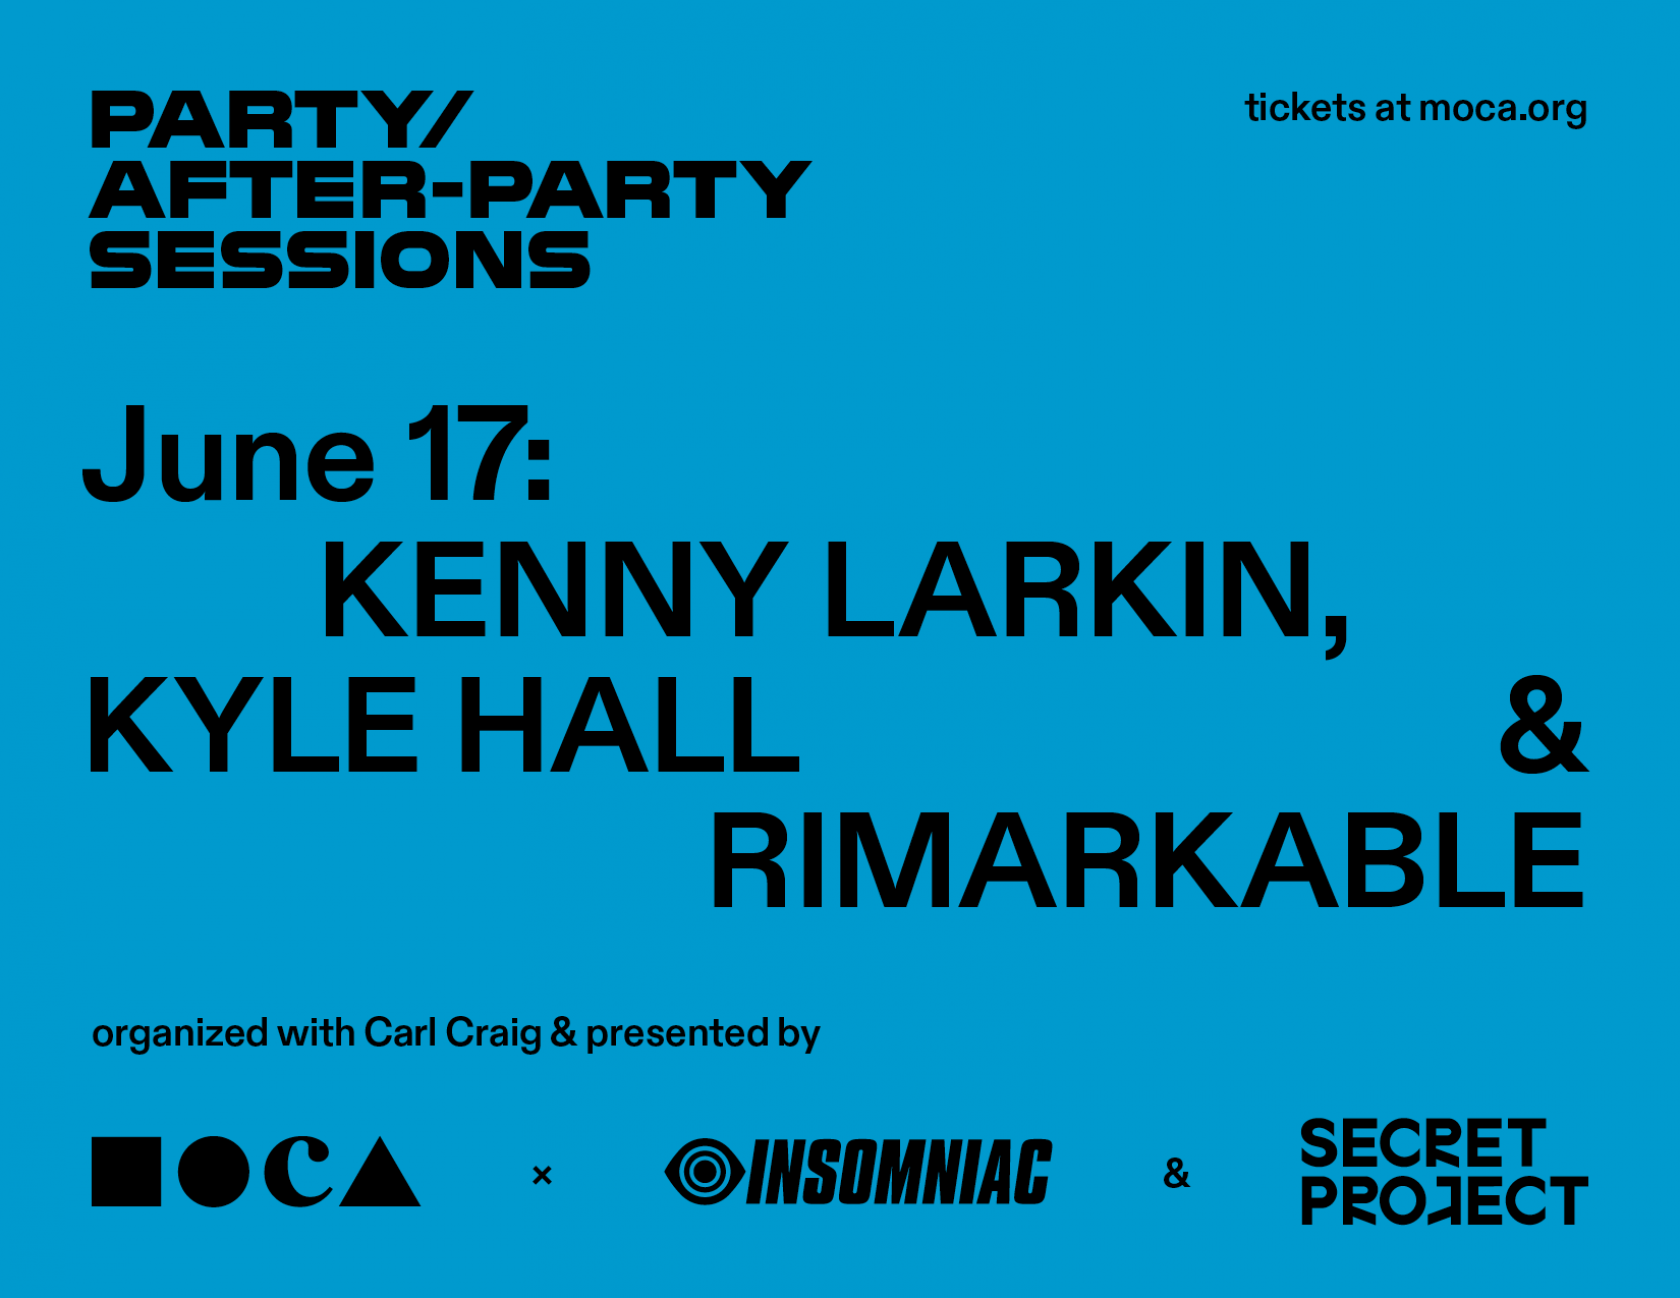 Party/After-Party Sessions With Kenny Larkin, Rimarkable, and Kyle Hall